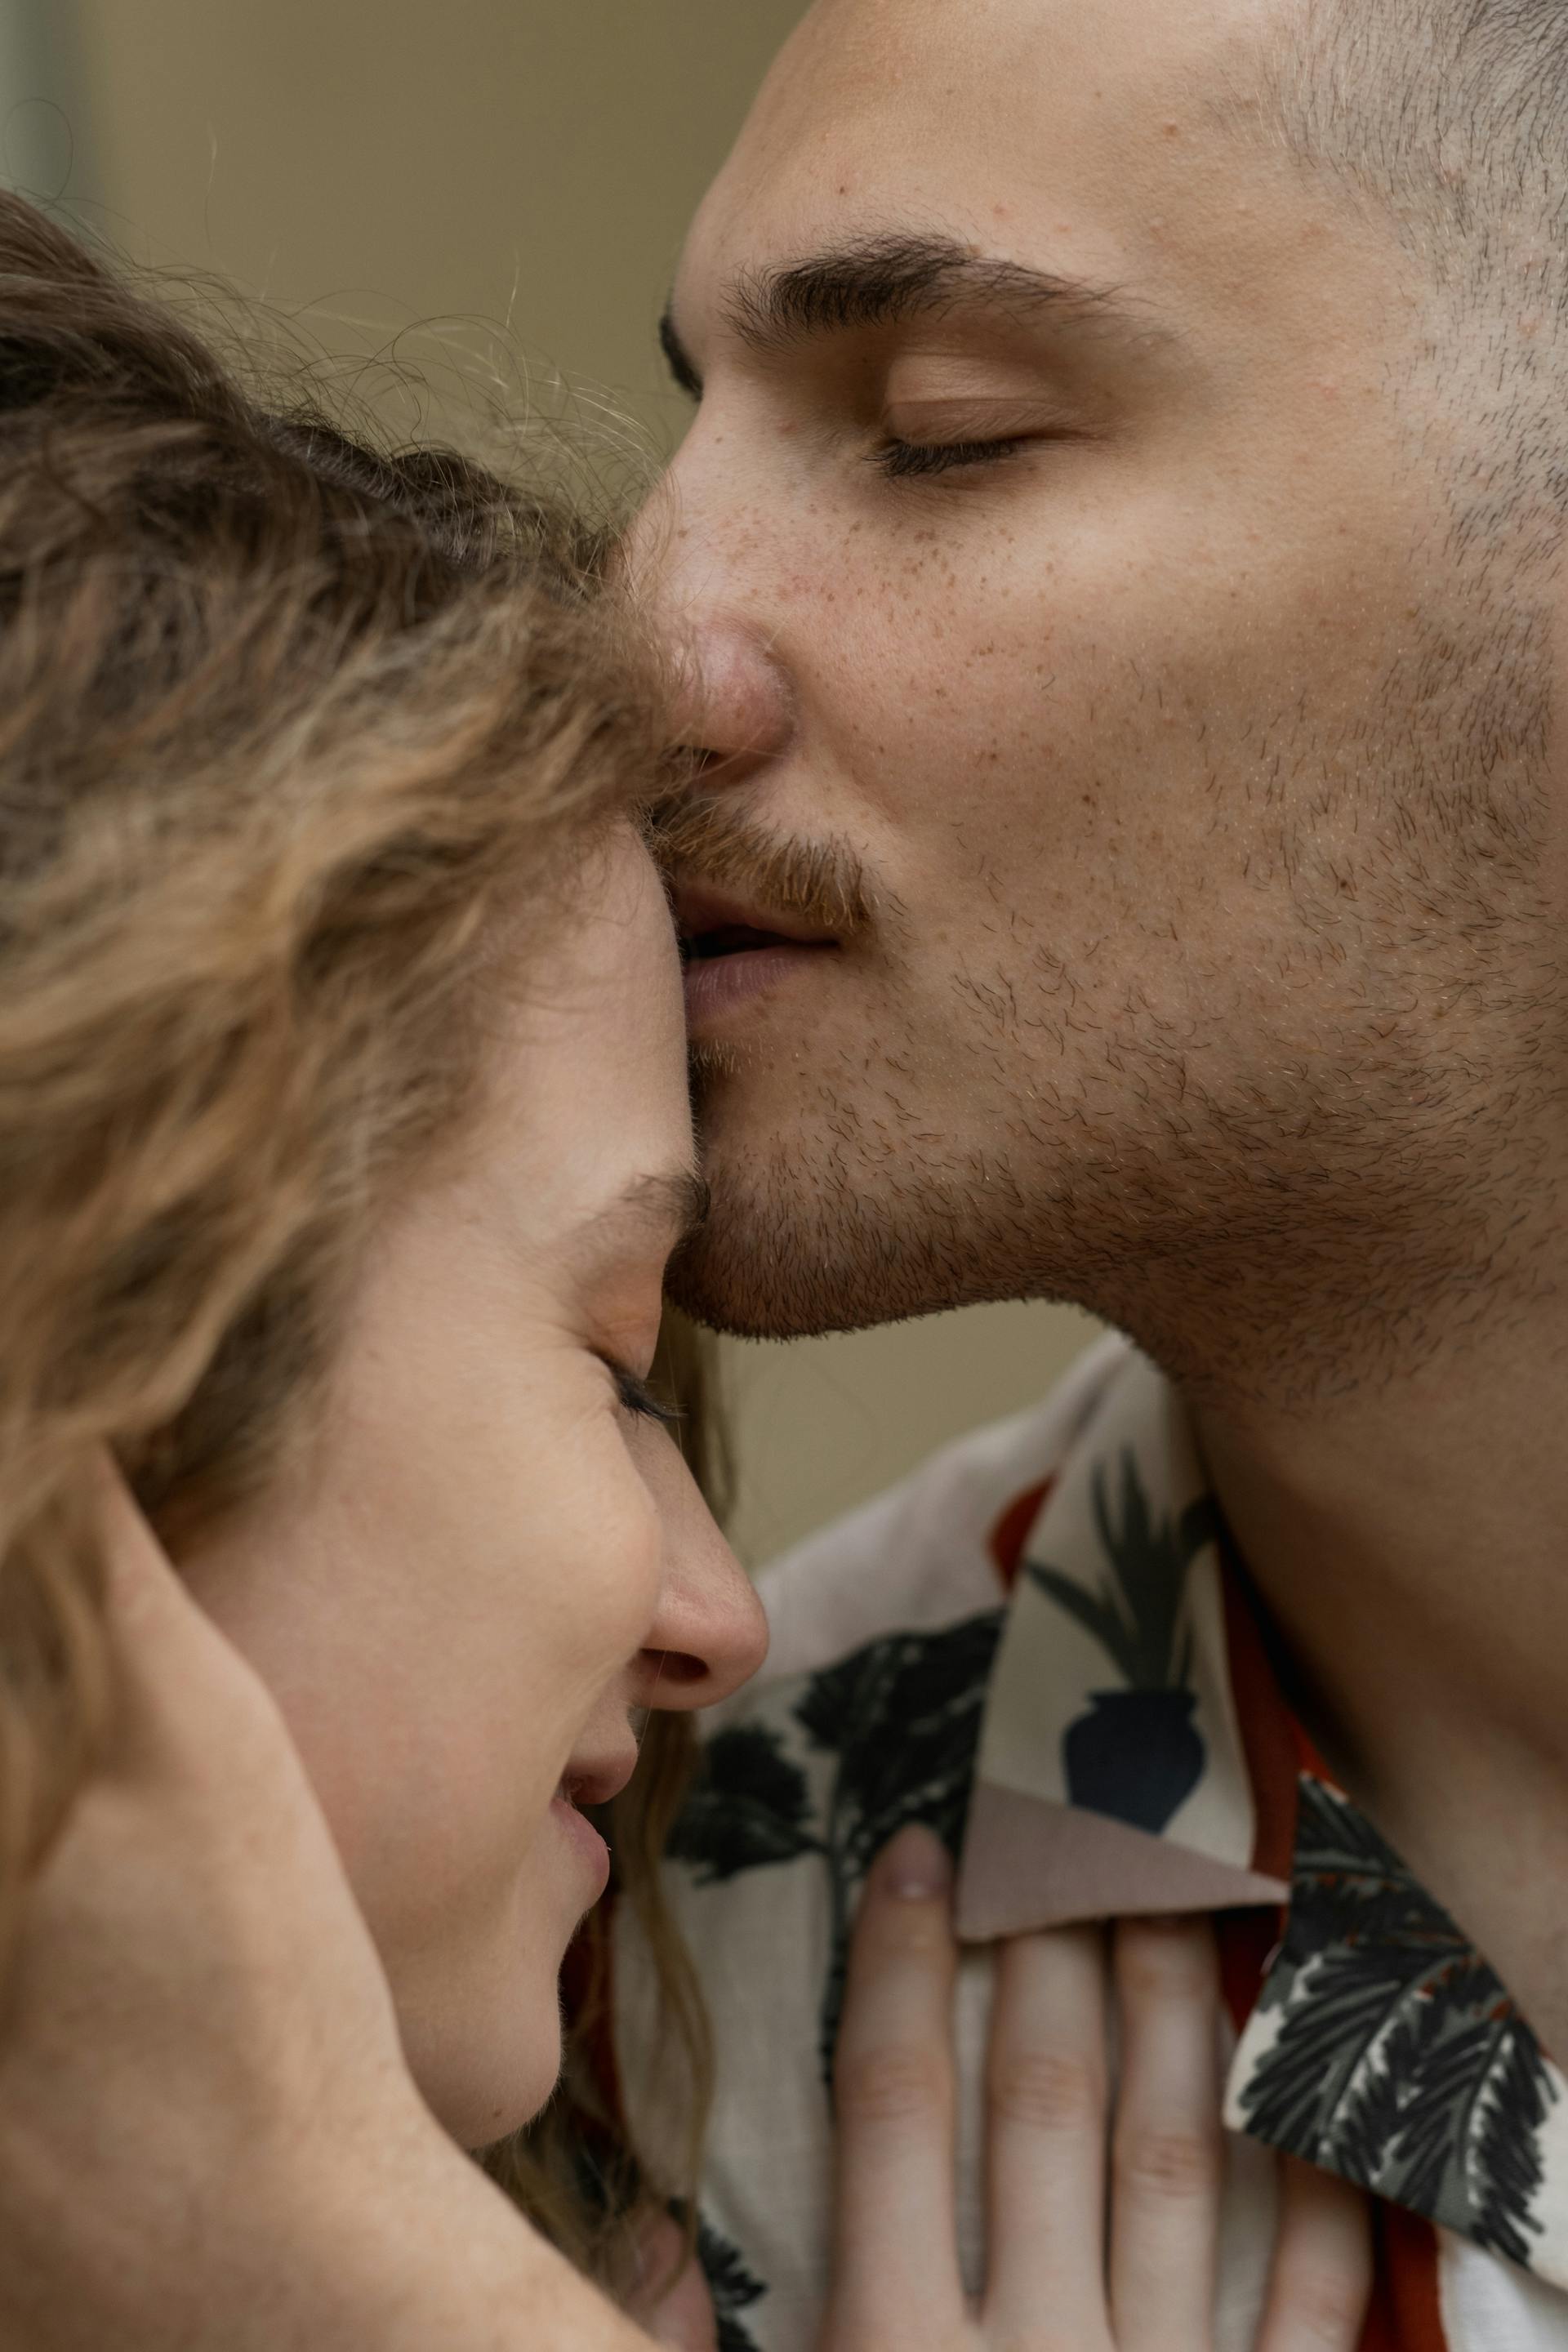 A man kisses his wife on the forehead | Source: Pexels